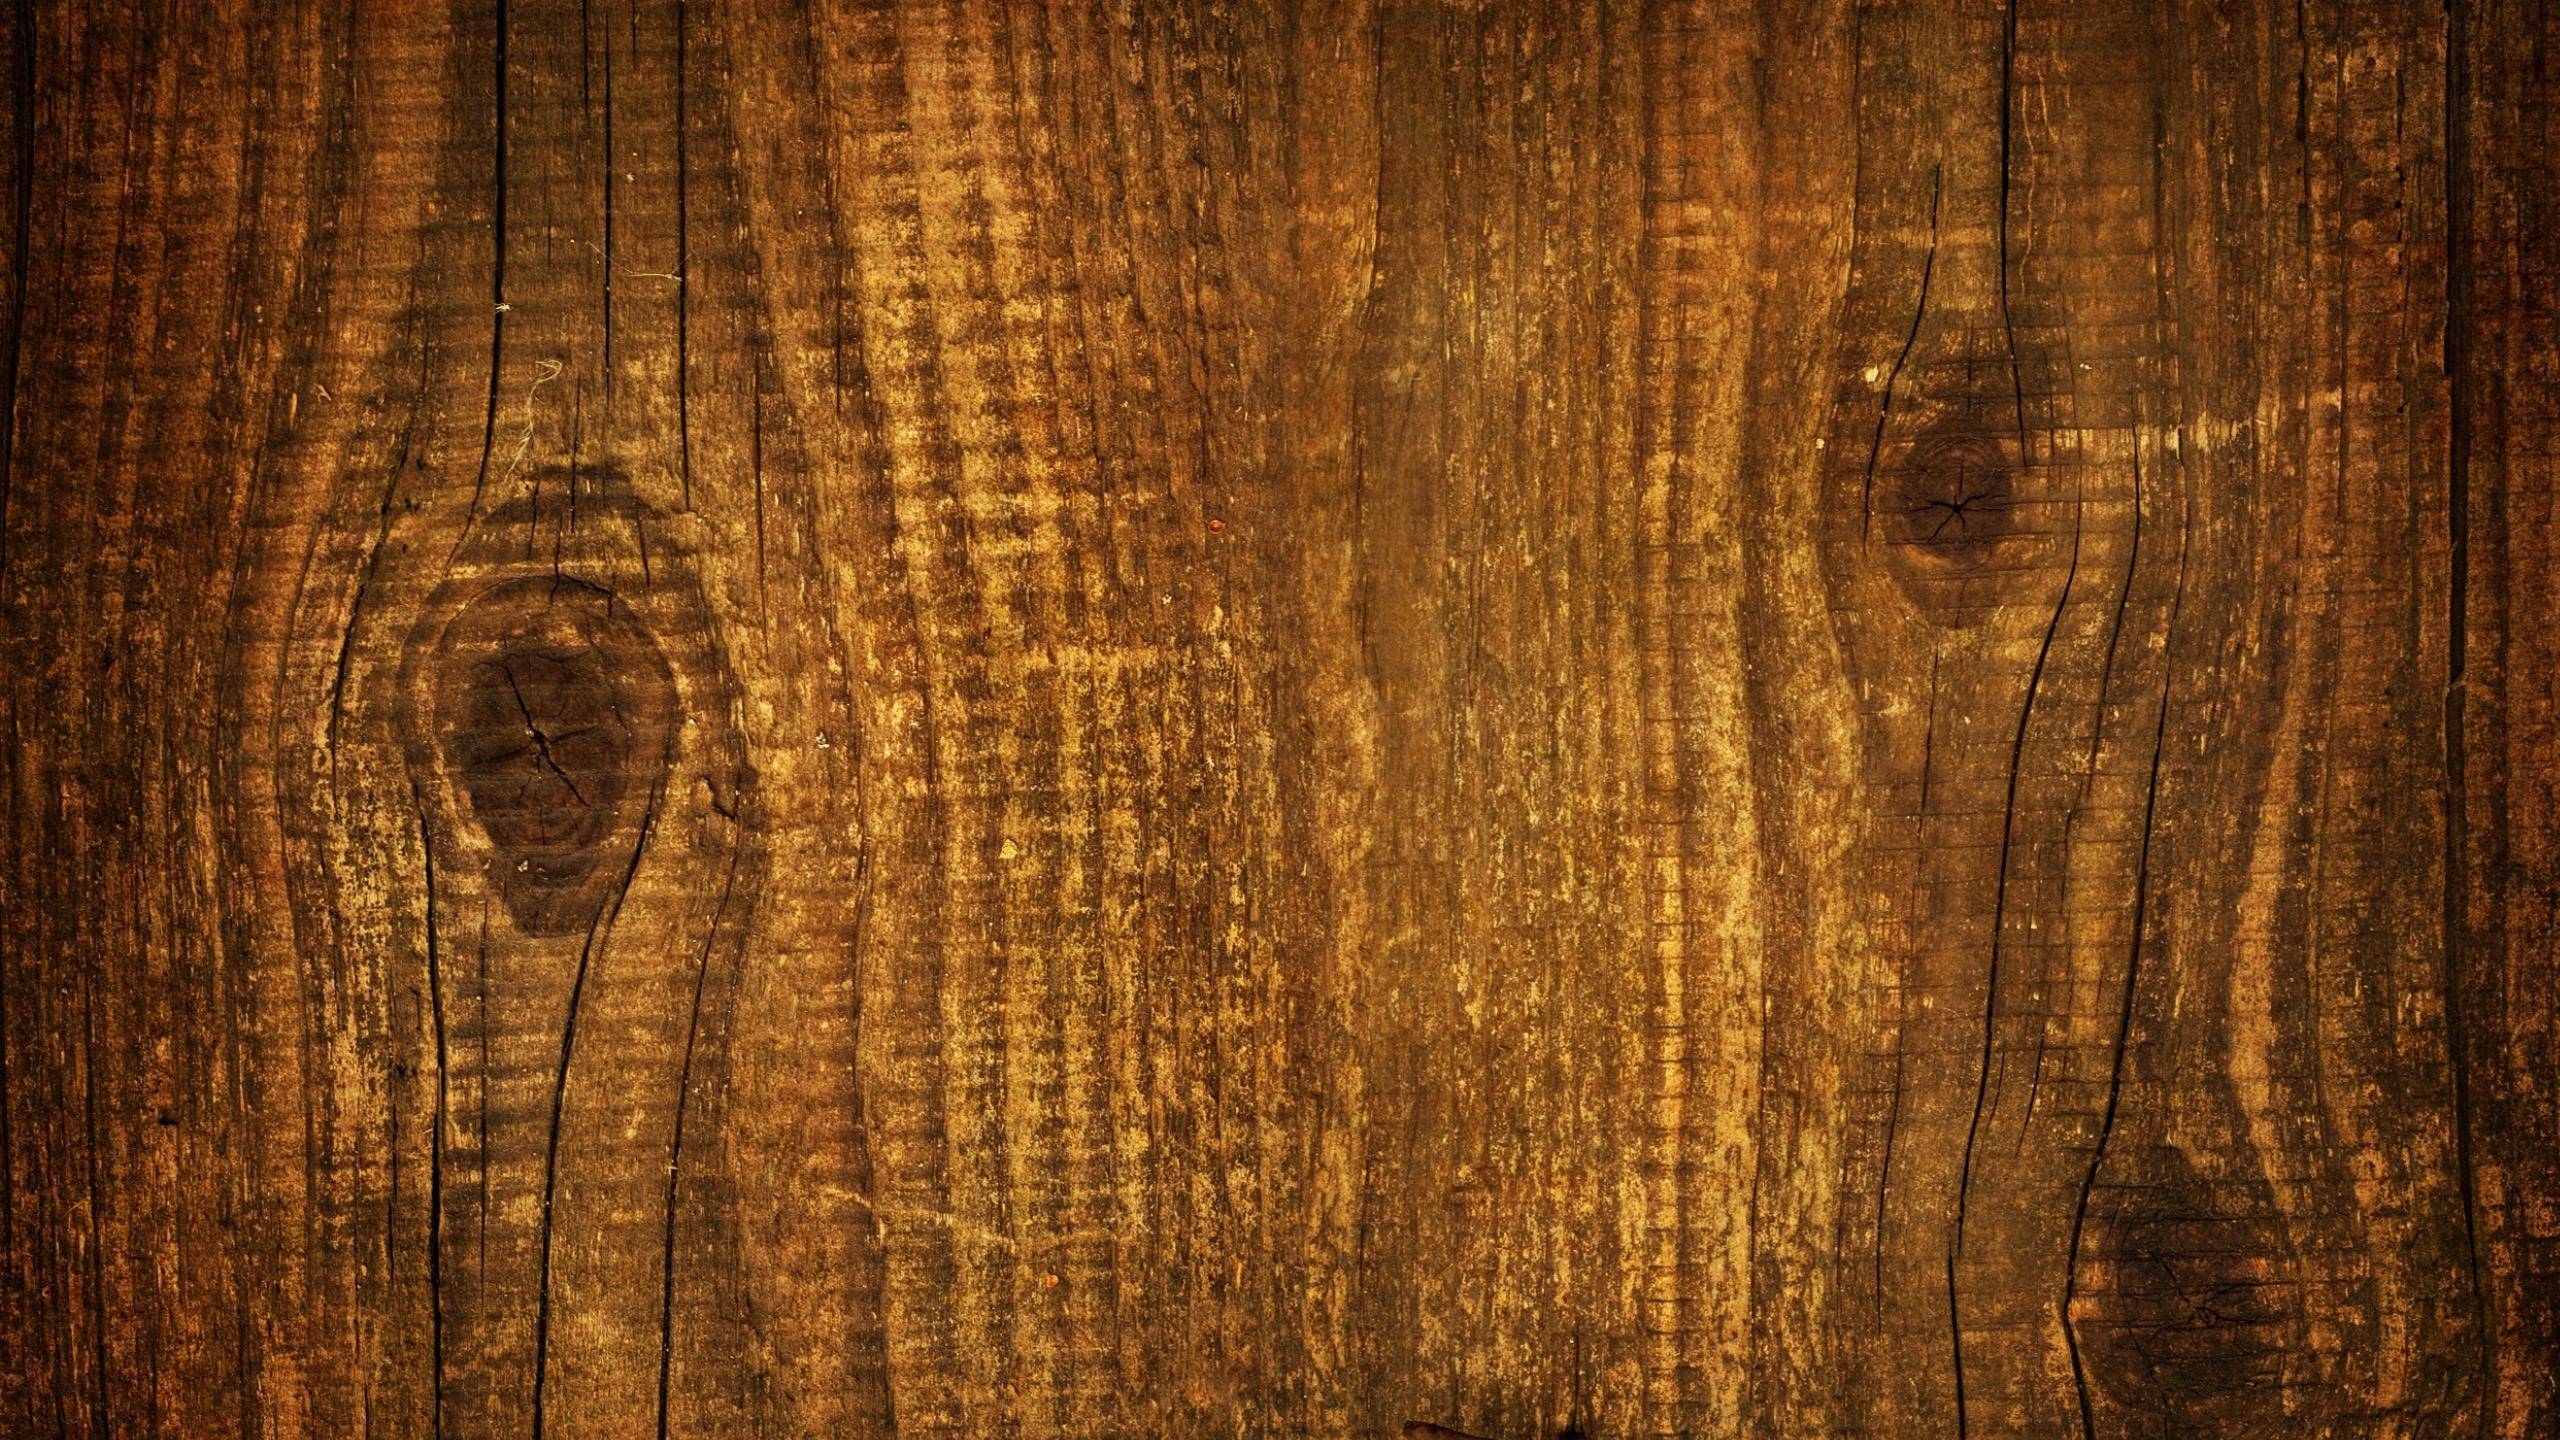 Related Pictures Free Download Wood Grain Texture For Hd Wallpapers